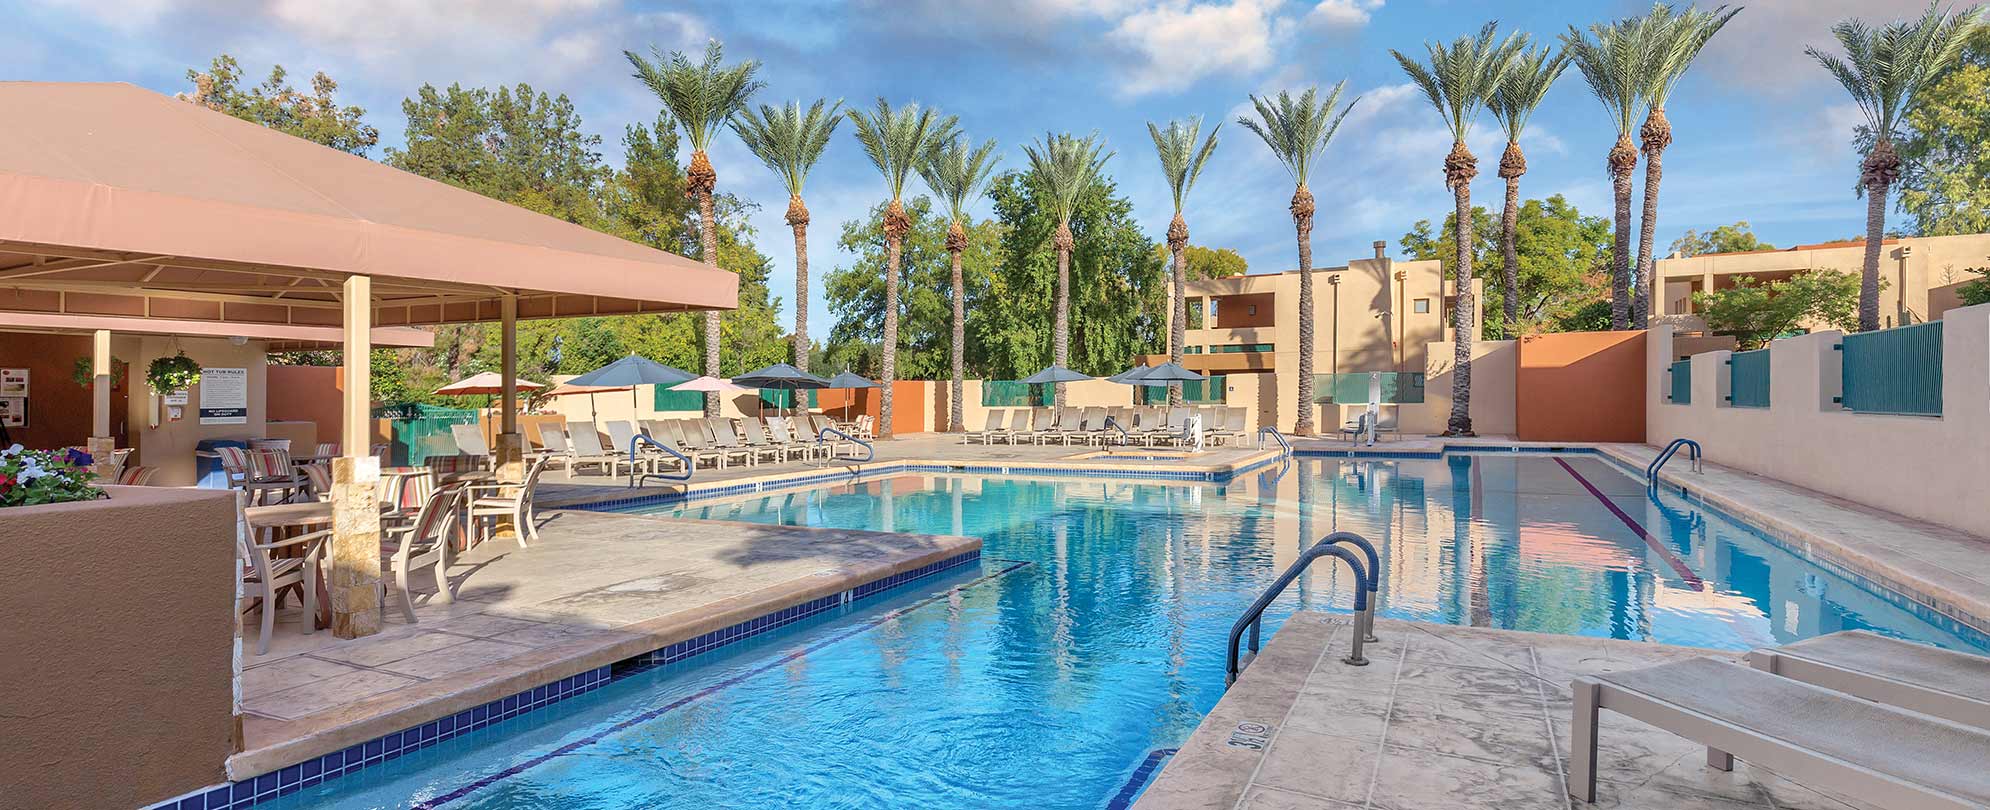 An outdoor pool with palm trees at Orange Tree Resort in Scottsdale, Arizona